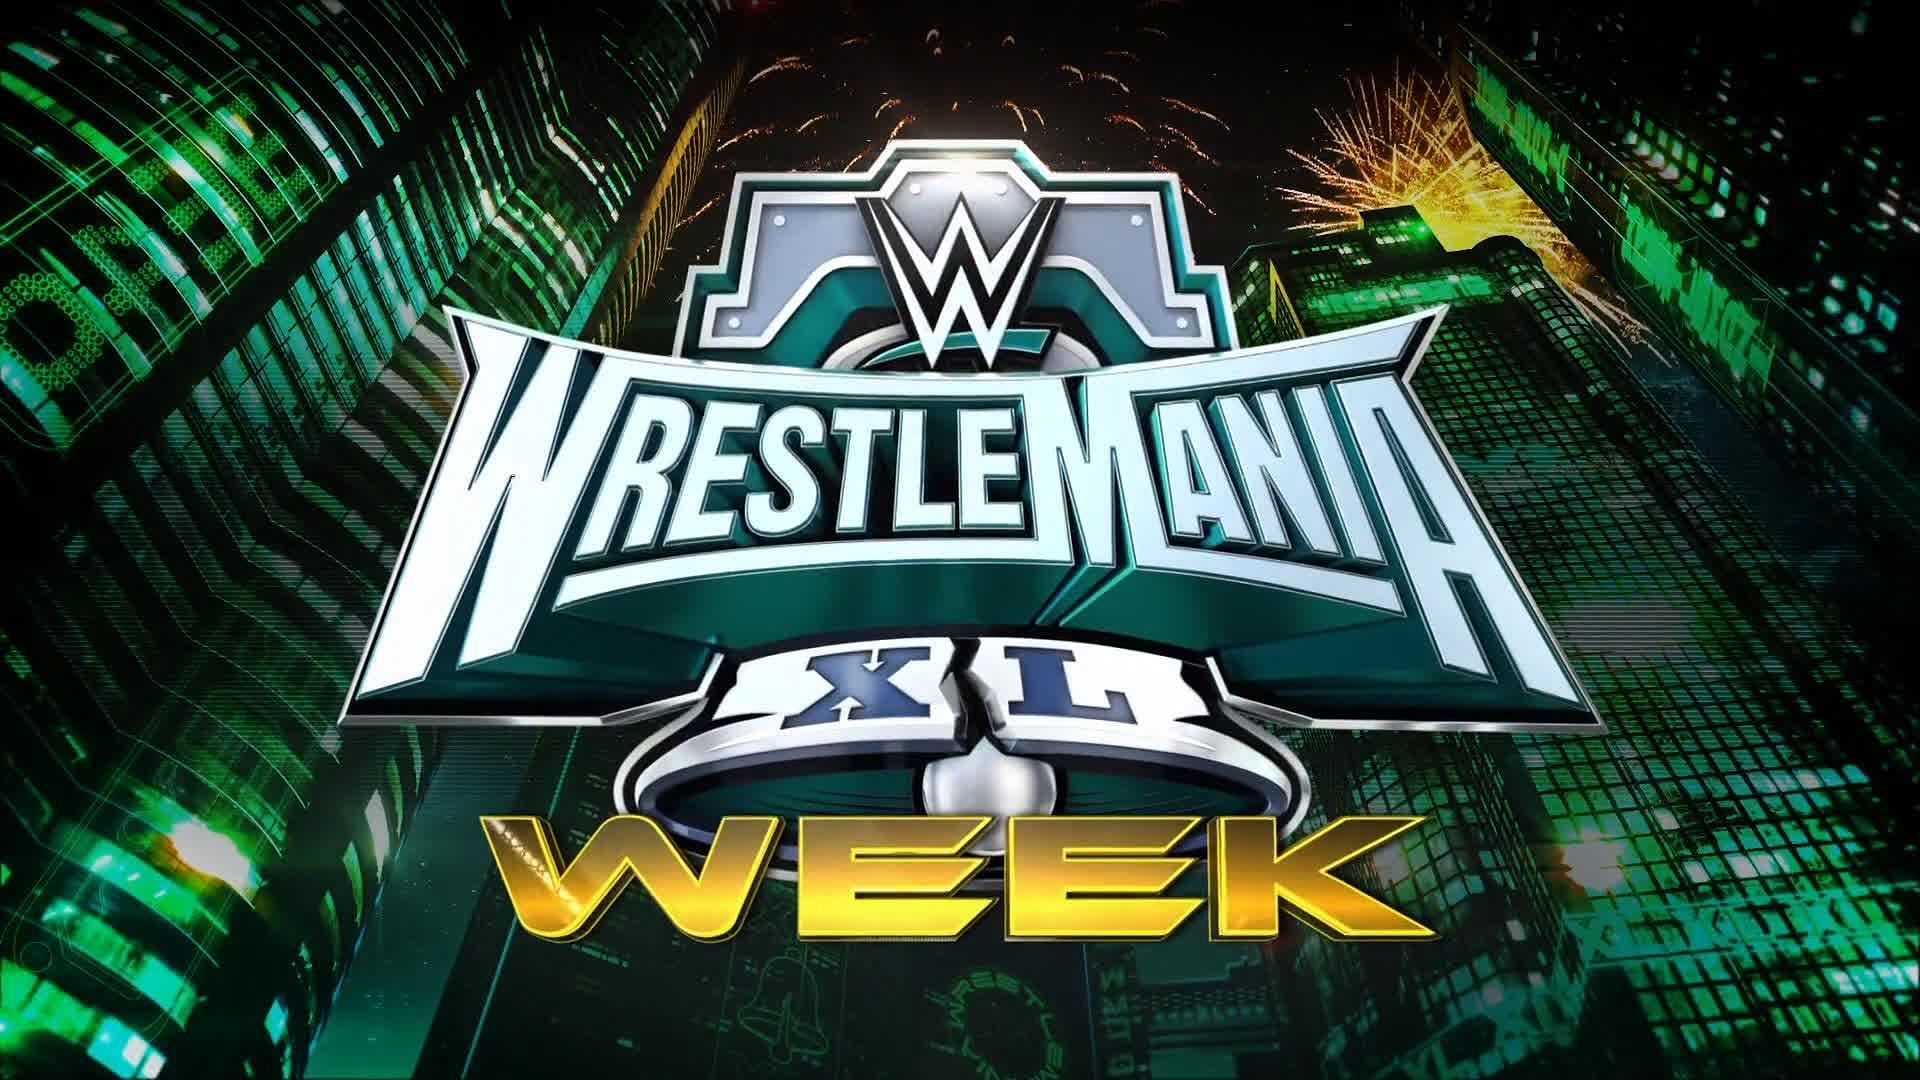 The official logo for WWE WrestleMania XL Week